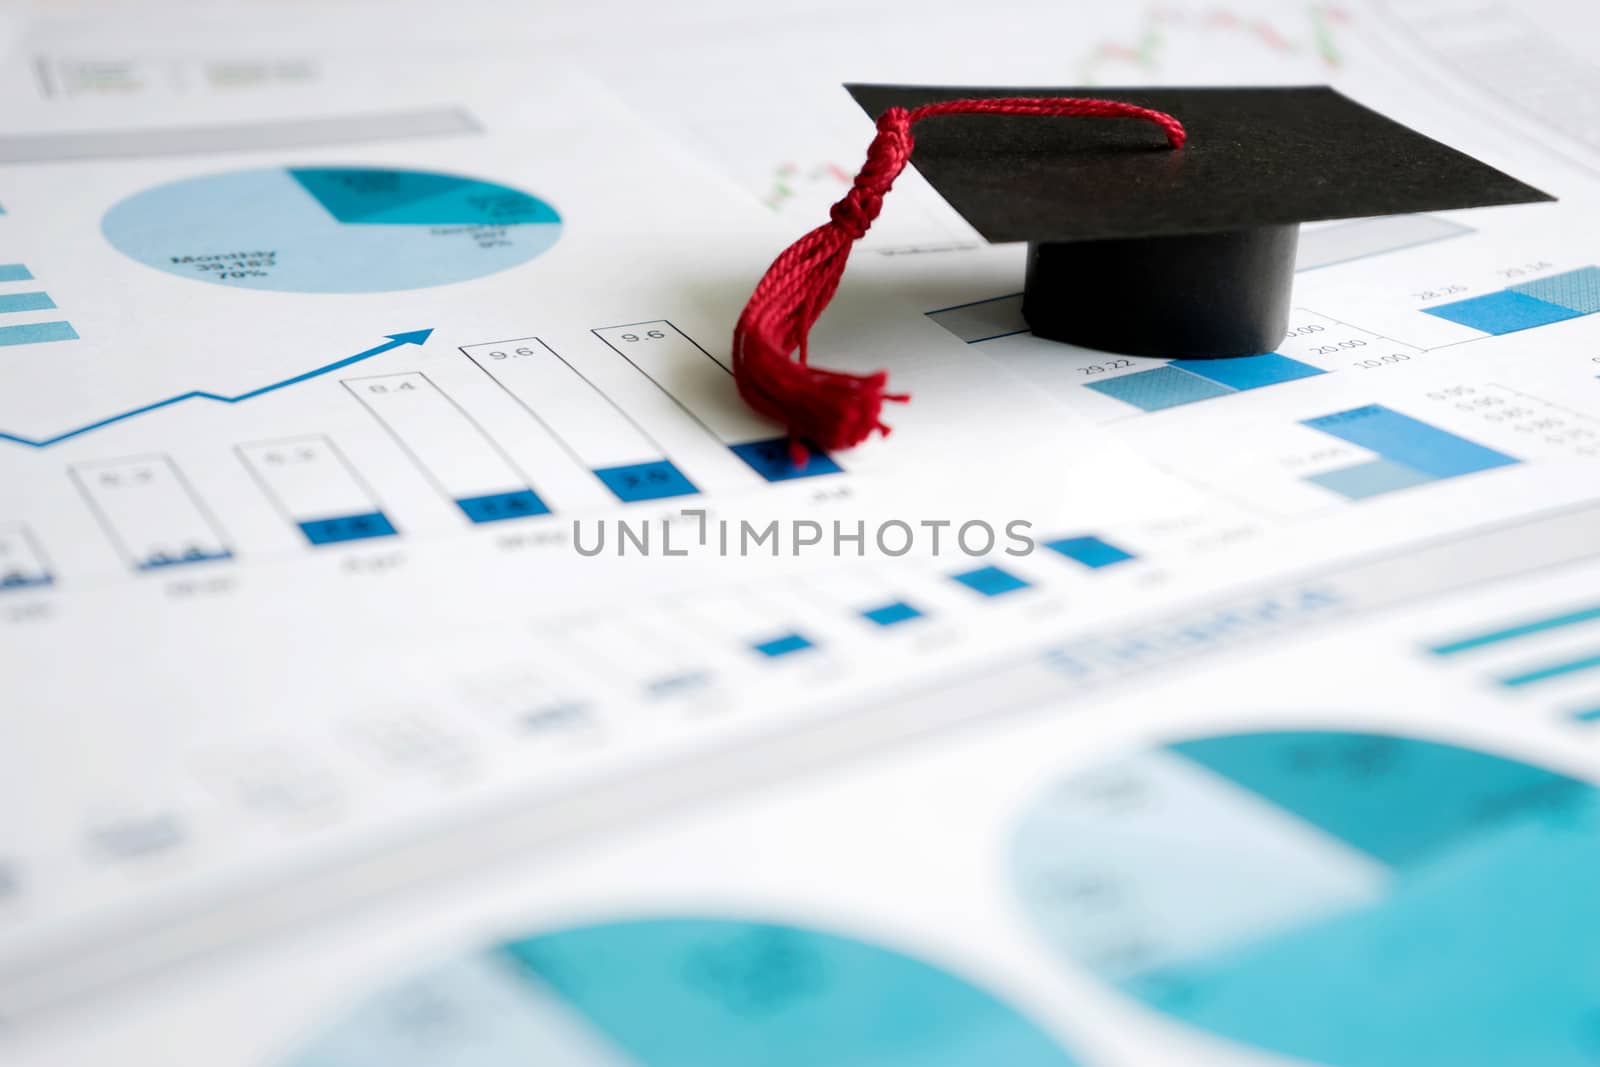 graduation caps on blue graphs and charts printed